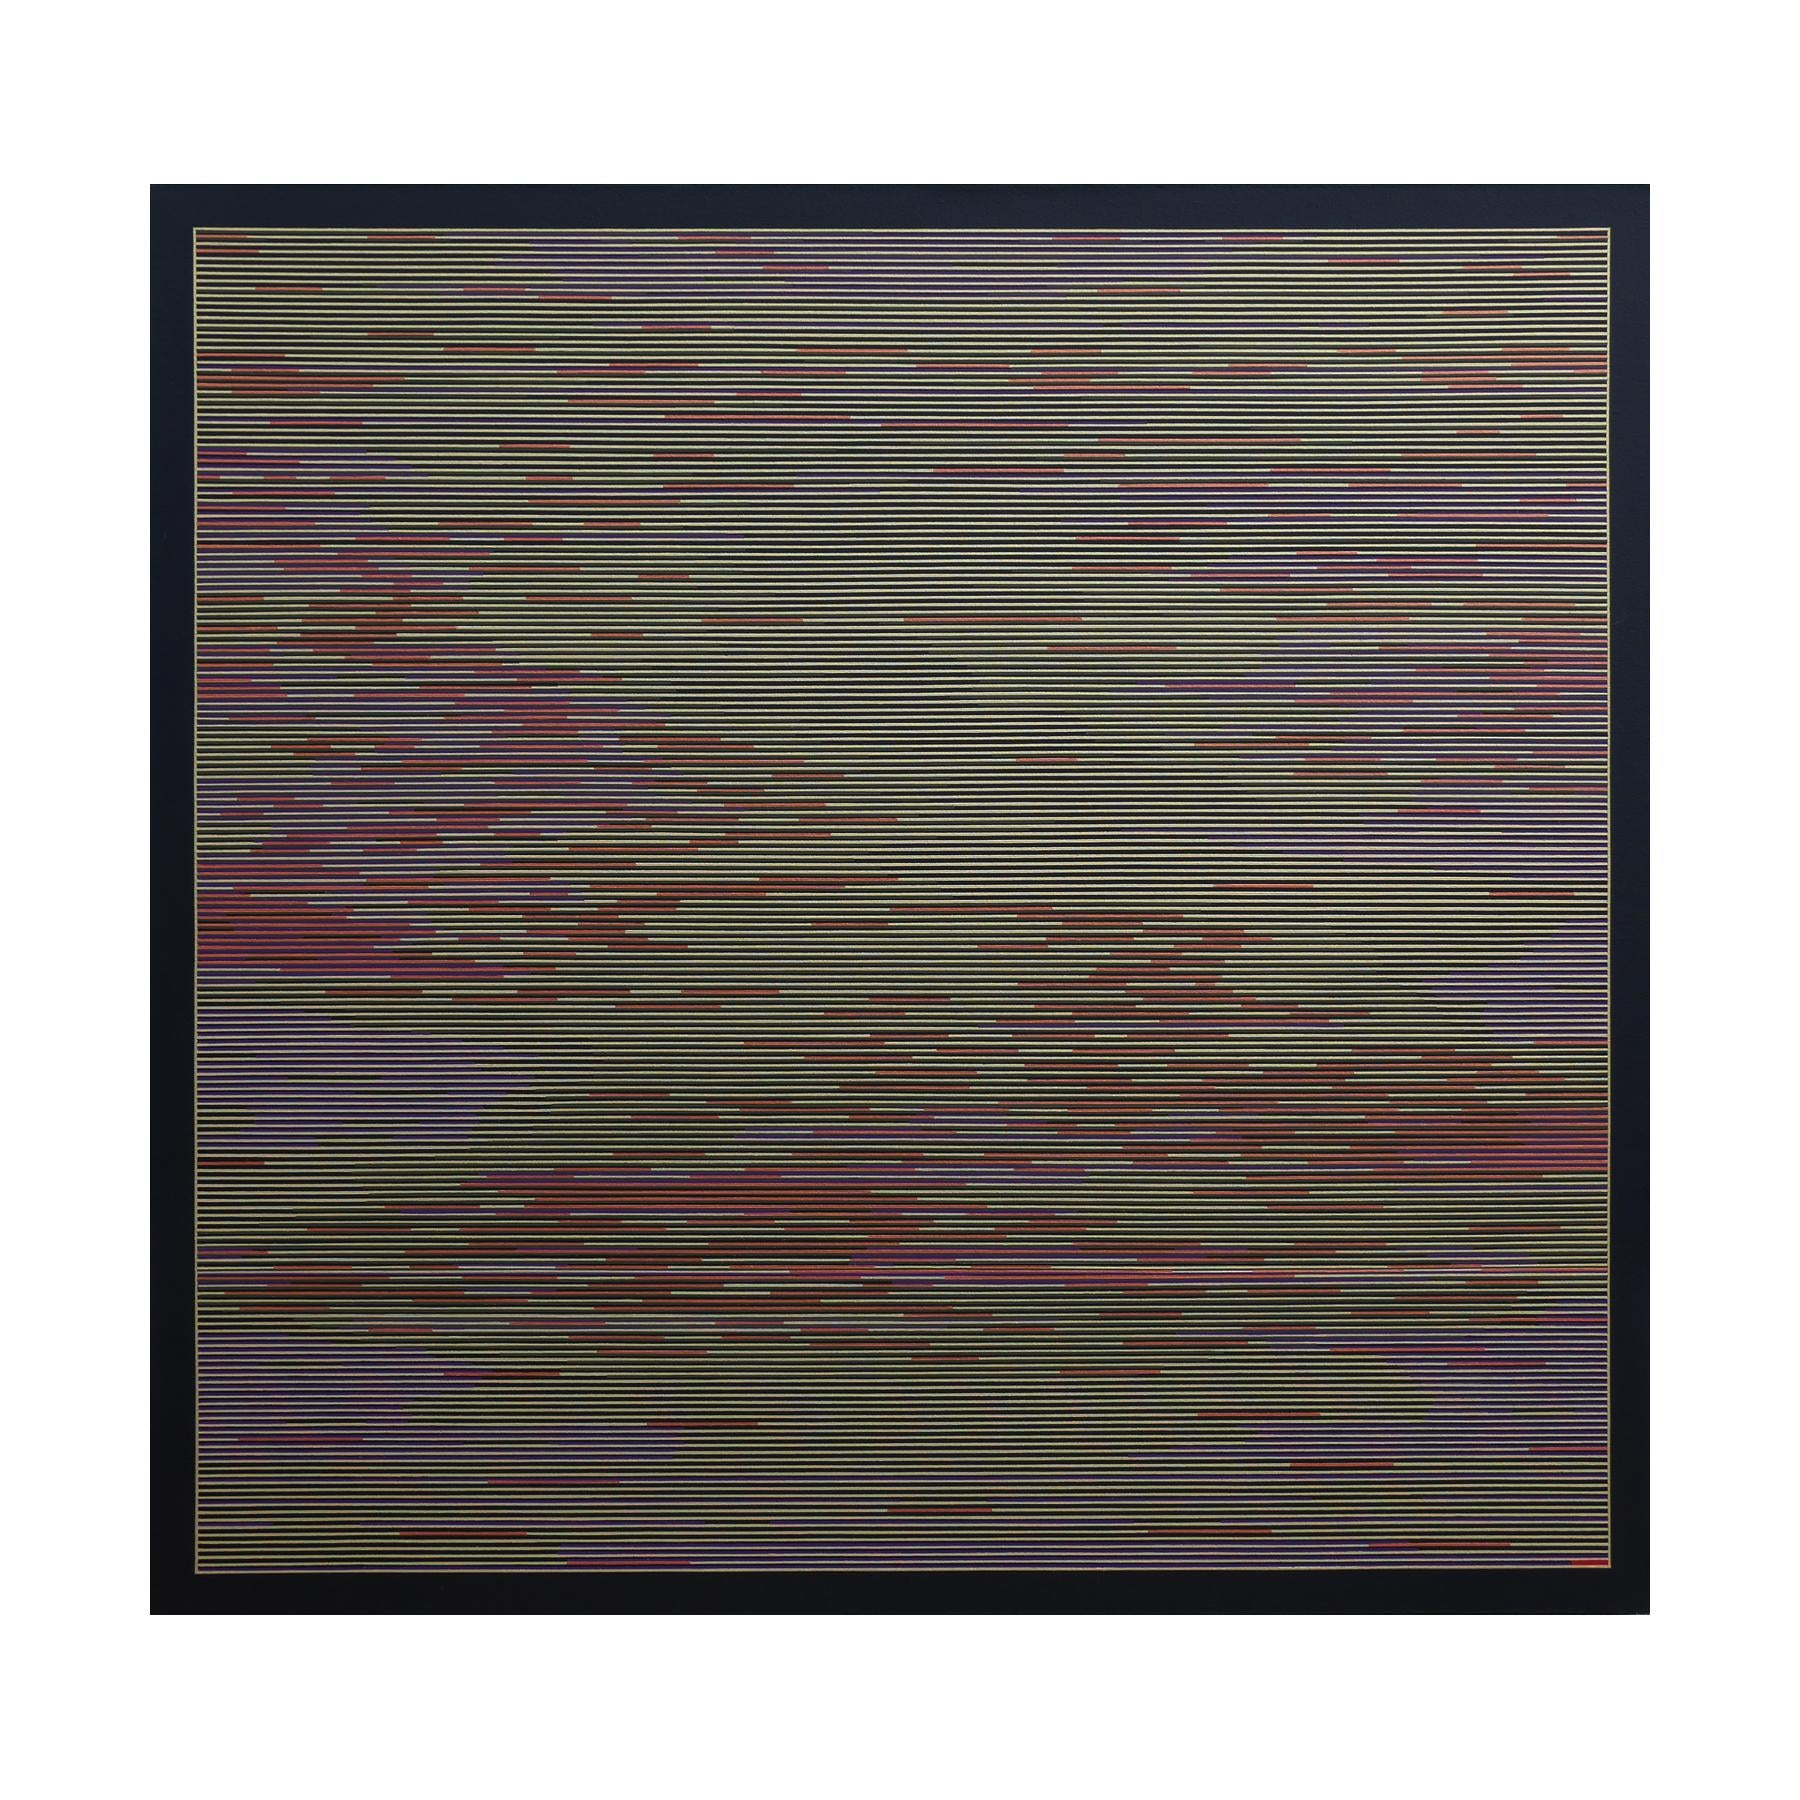 Contemporary abstract geometric painting by artist Mark Byckowski. The work features horizontal lines with a variety of vivid colors of light yellow and orange painted against a black background. Each work in the series features a bright red line at